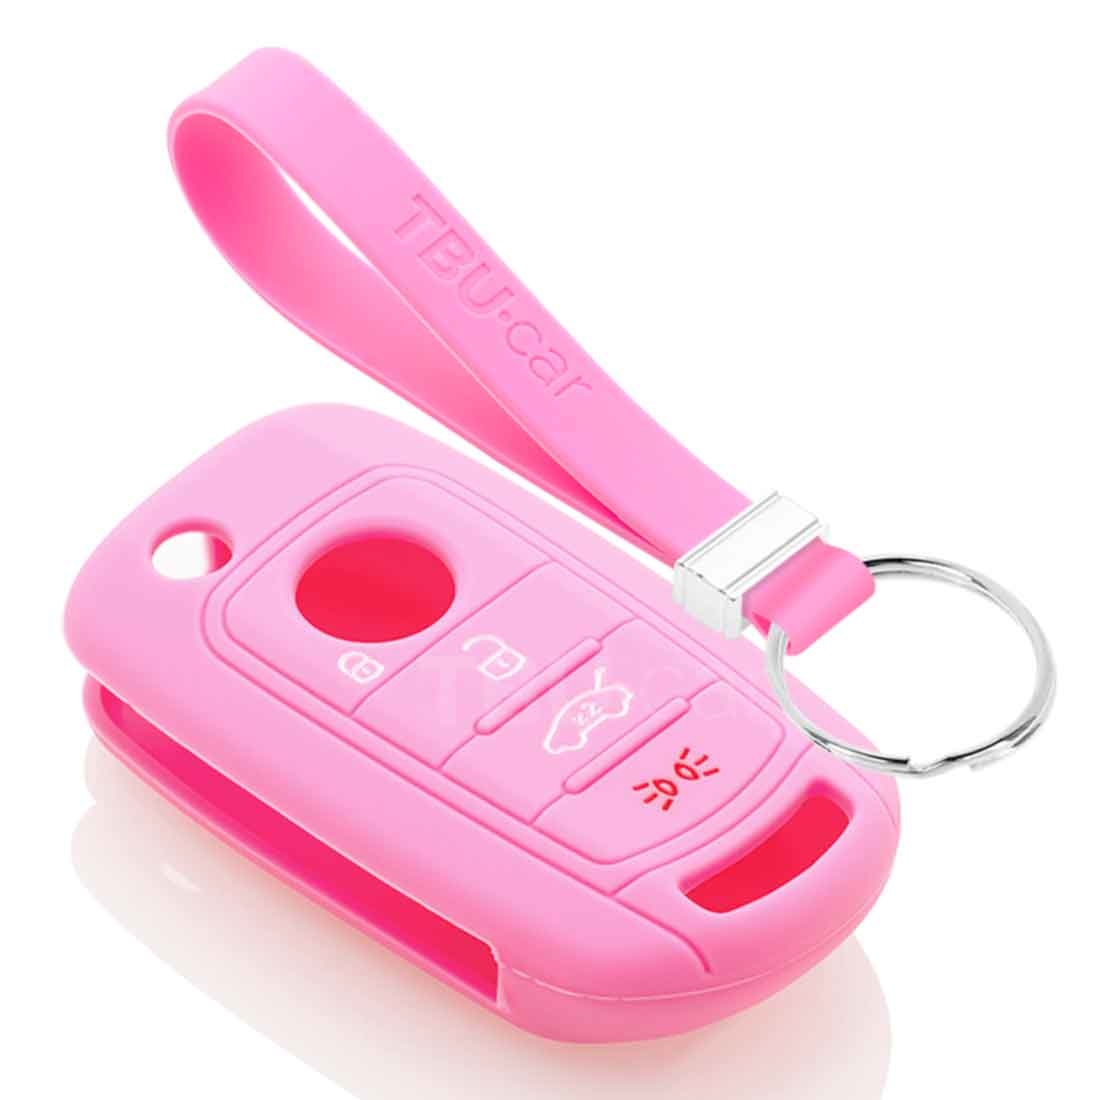 TBU car TBU car Car key cover compatible with Fiat - Silicone Protective Remote Key Shell - FOB Case Cover - Pink